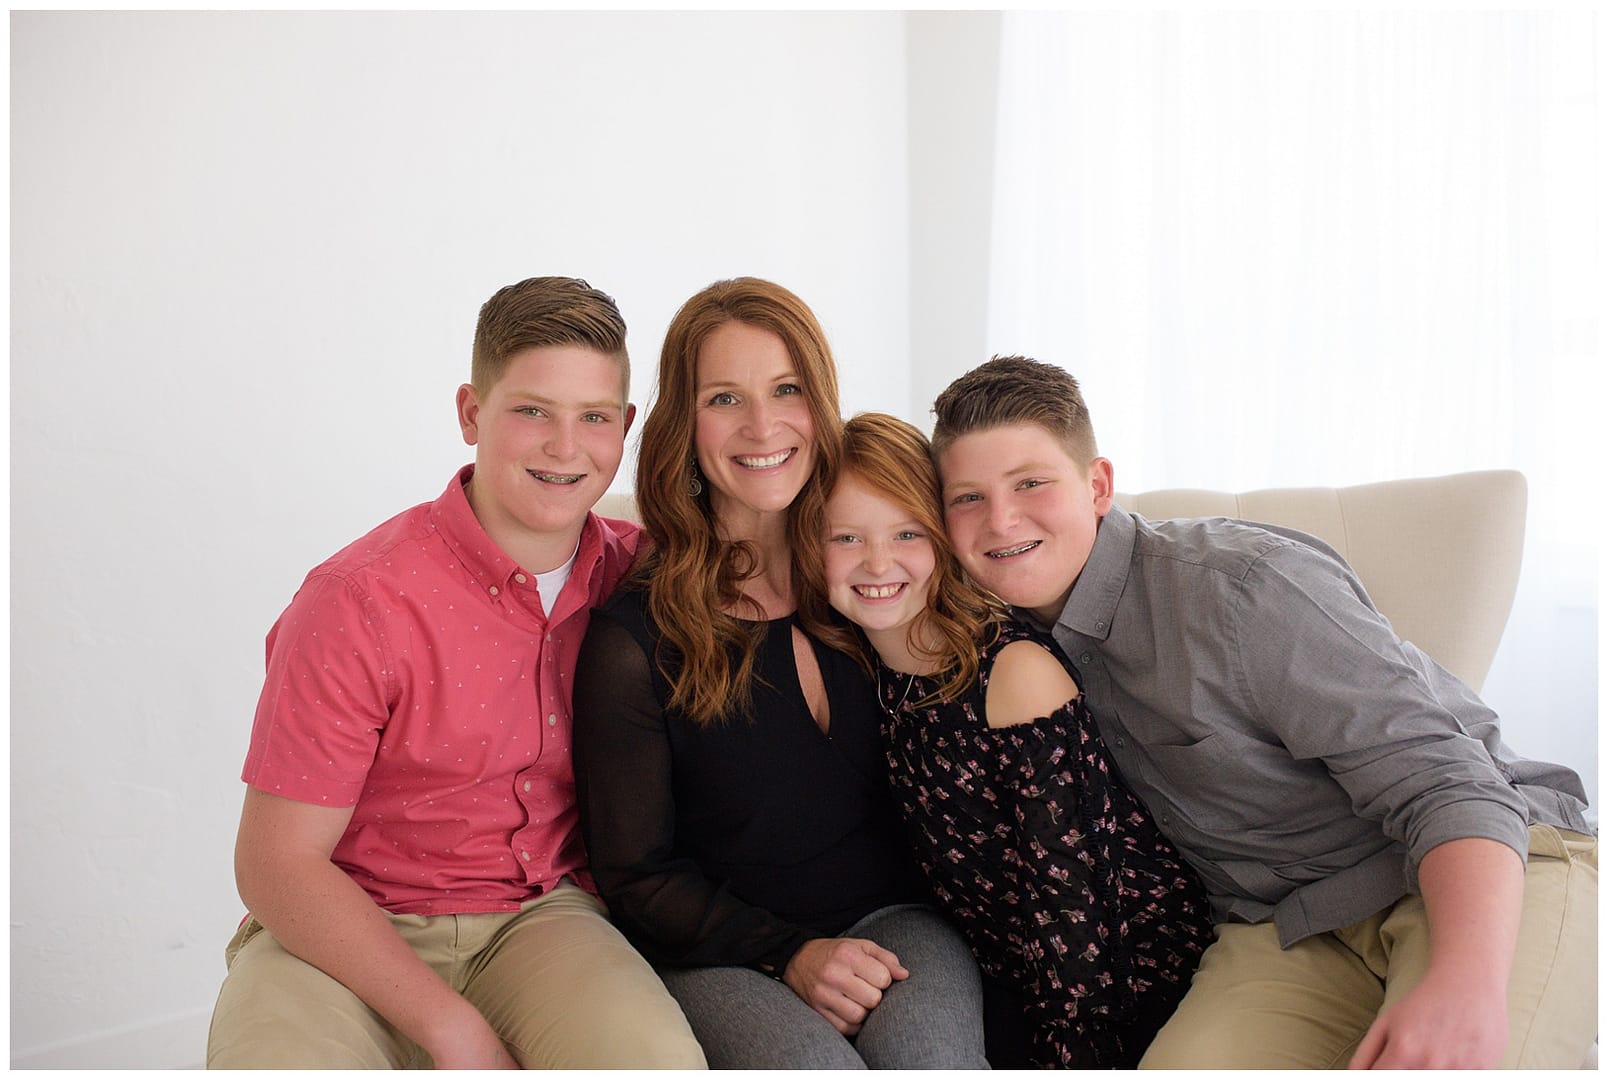 Mom and her twin boys and daughter. Photos by Tiffany Hix Photography.